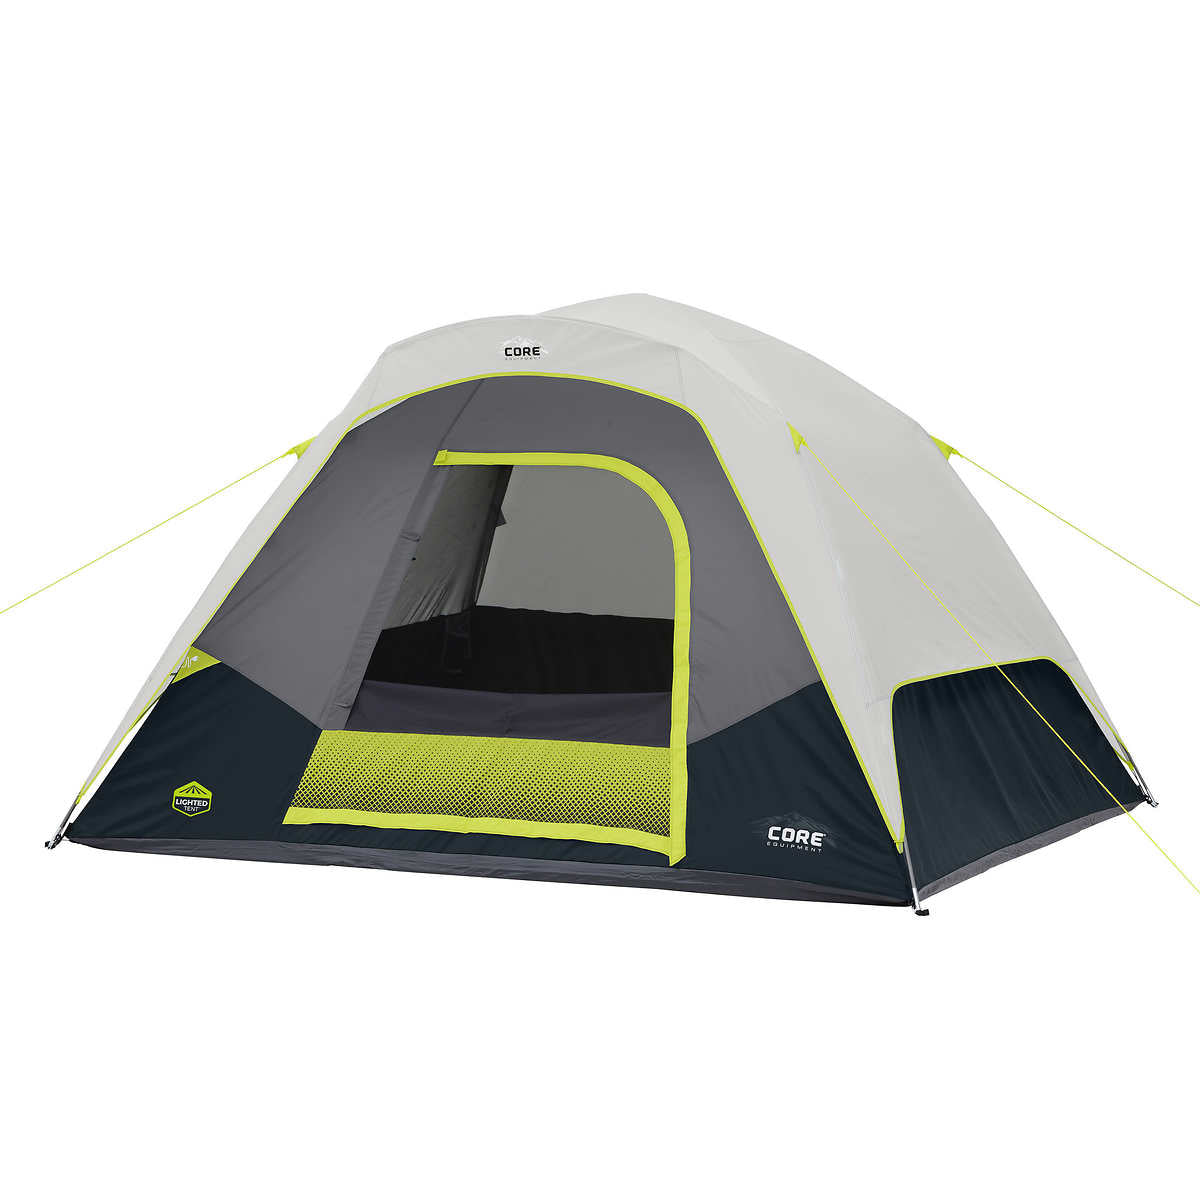 Like NEW - Costco - CORE 6-Person Lighted Dome Tent - Retail $115